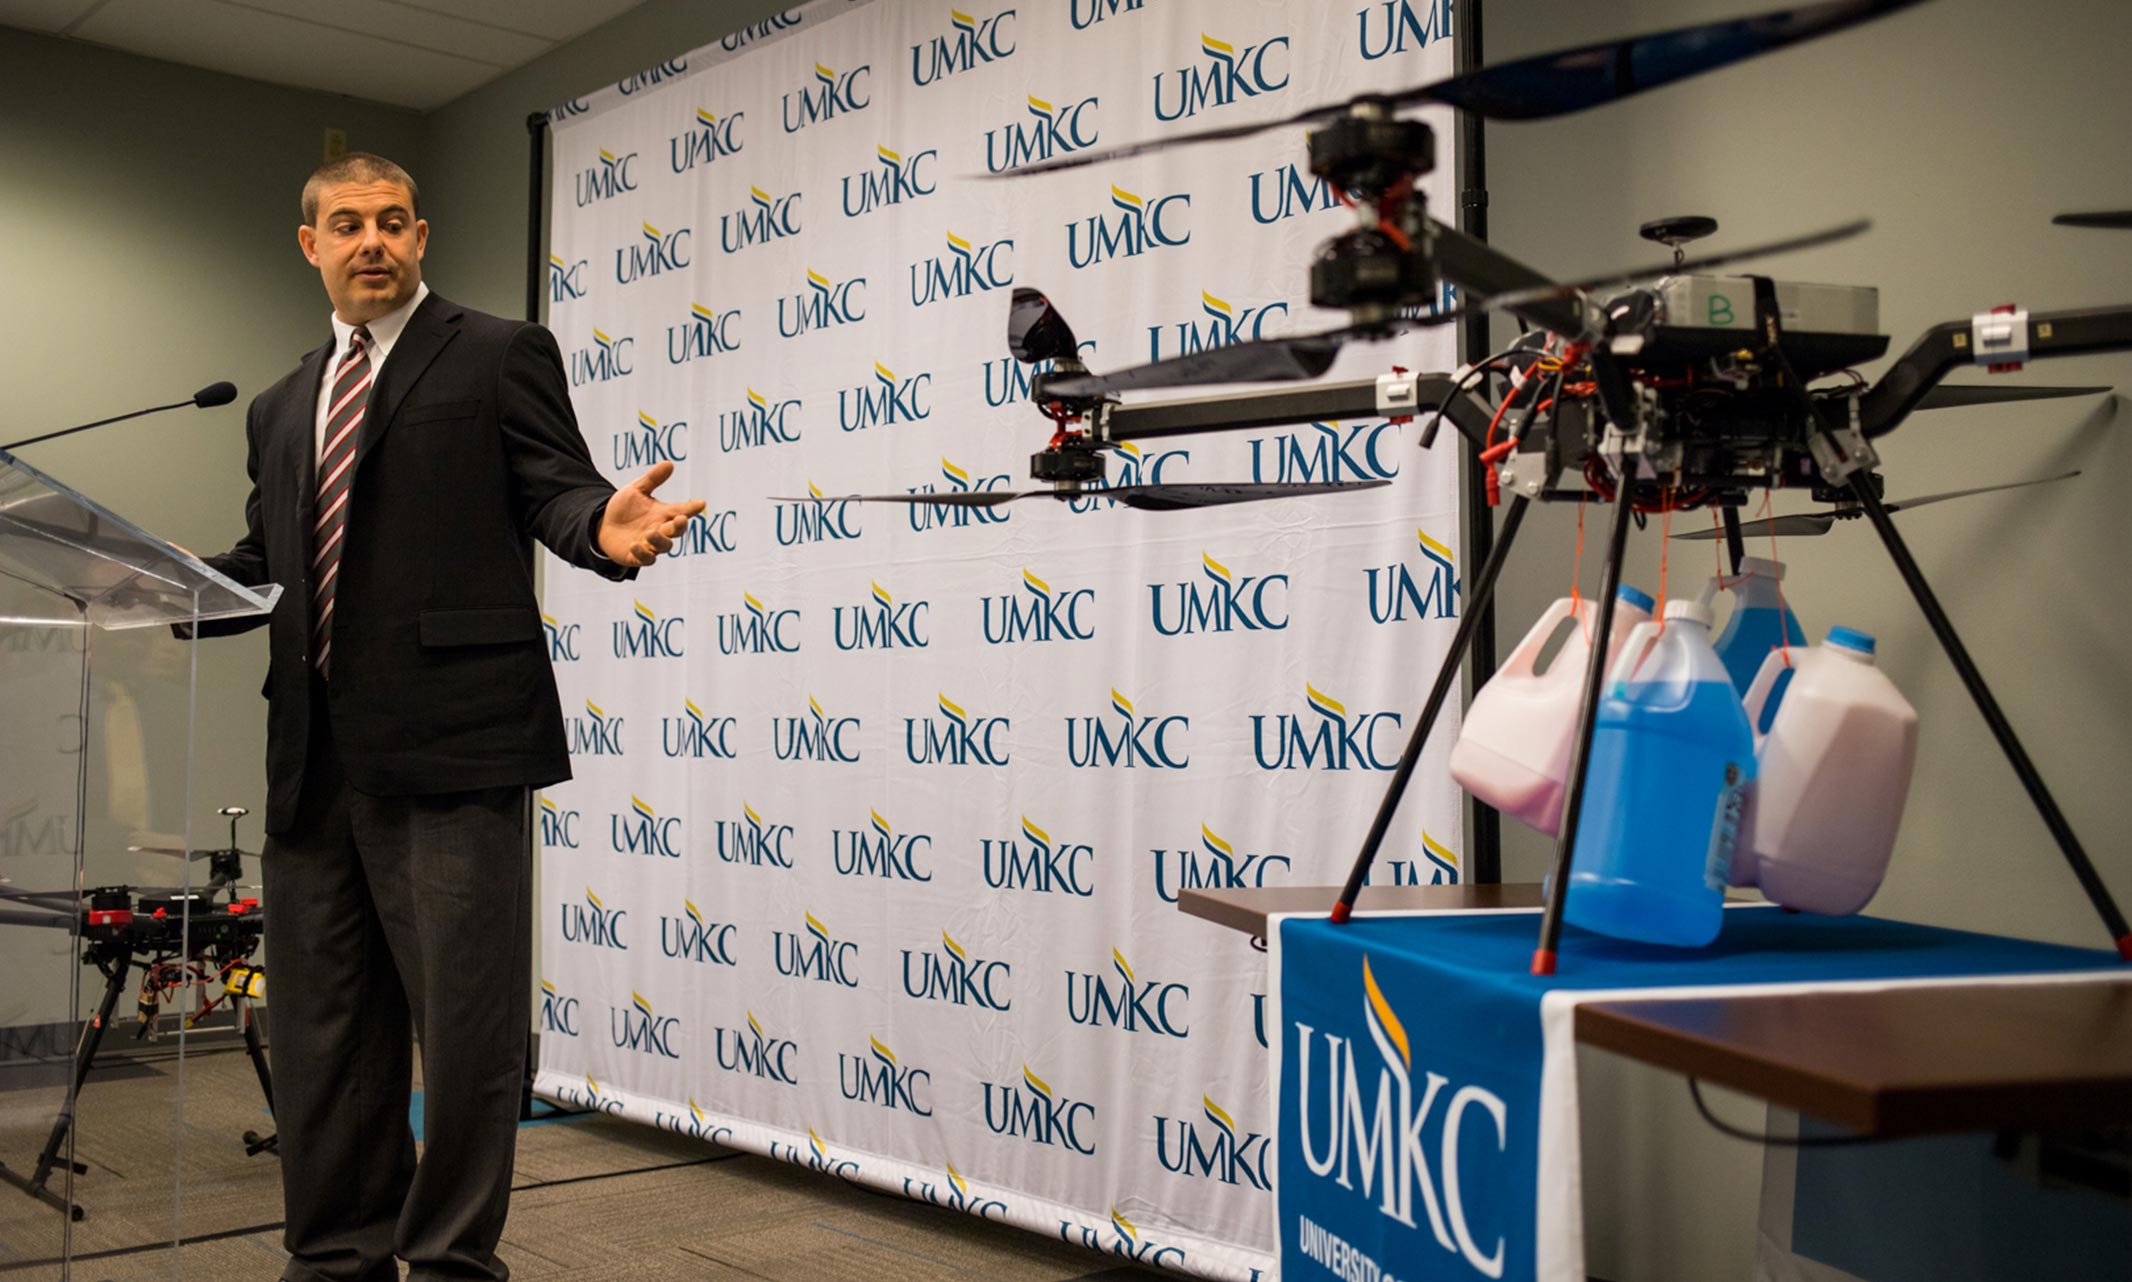 Tony Caruso, UMKC associate vice chancellor presenting research and models of drones